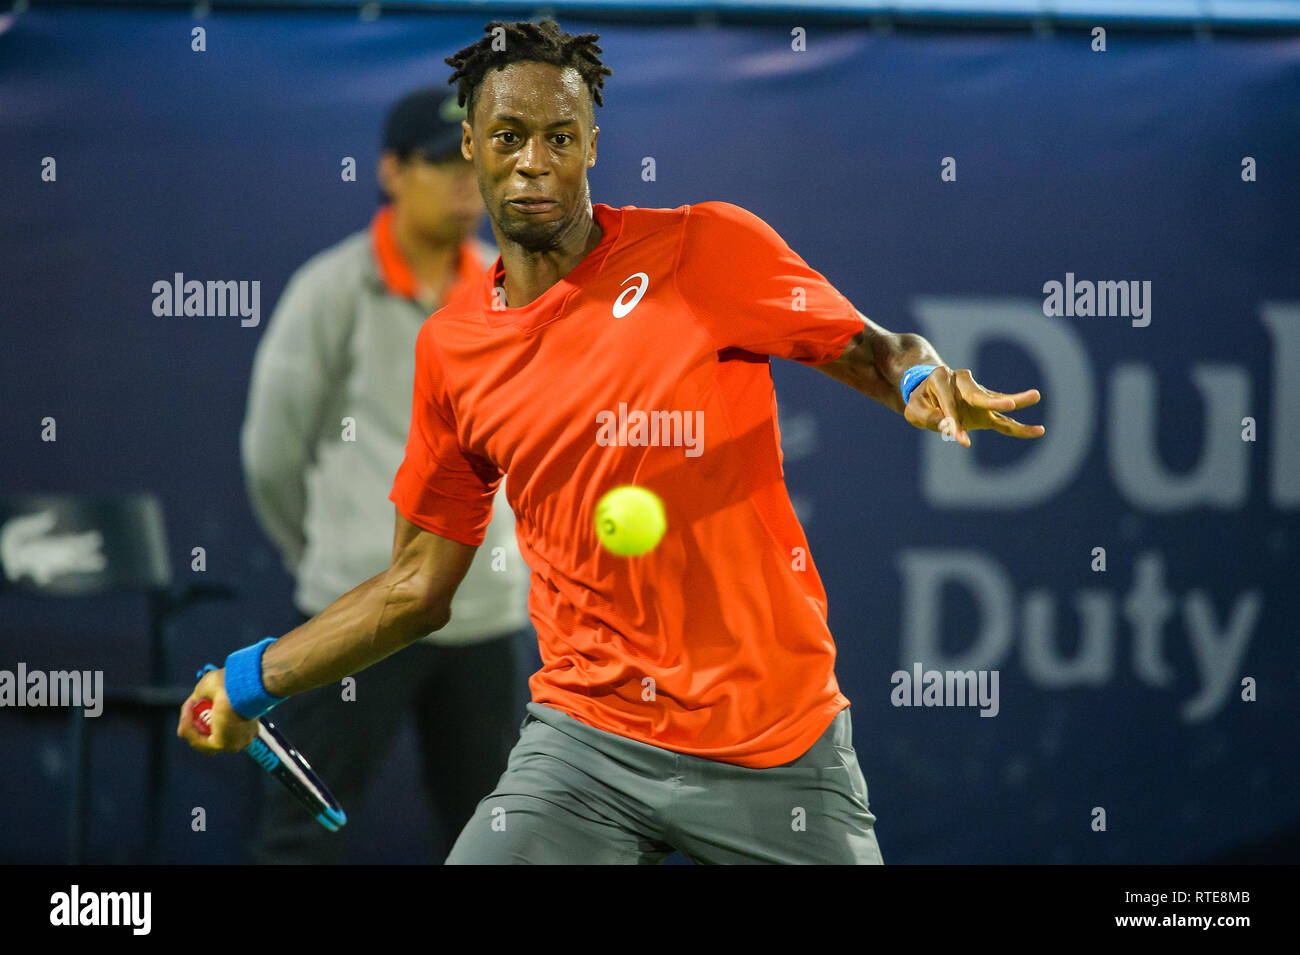 Dubai, UAE. 1st March 2019. Gael Monfils of France plays a forehand during his semifinal match against Stefanos Tsitsipas of Greece at the 2019 Dubai Duty Free Tennis Championships. Monfils lost the match 6-4, 6-7(4-7), 6-7(4-7) Credit: Feroz Khan/Alamy Live News Stock Photo